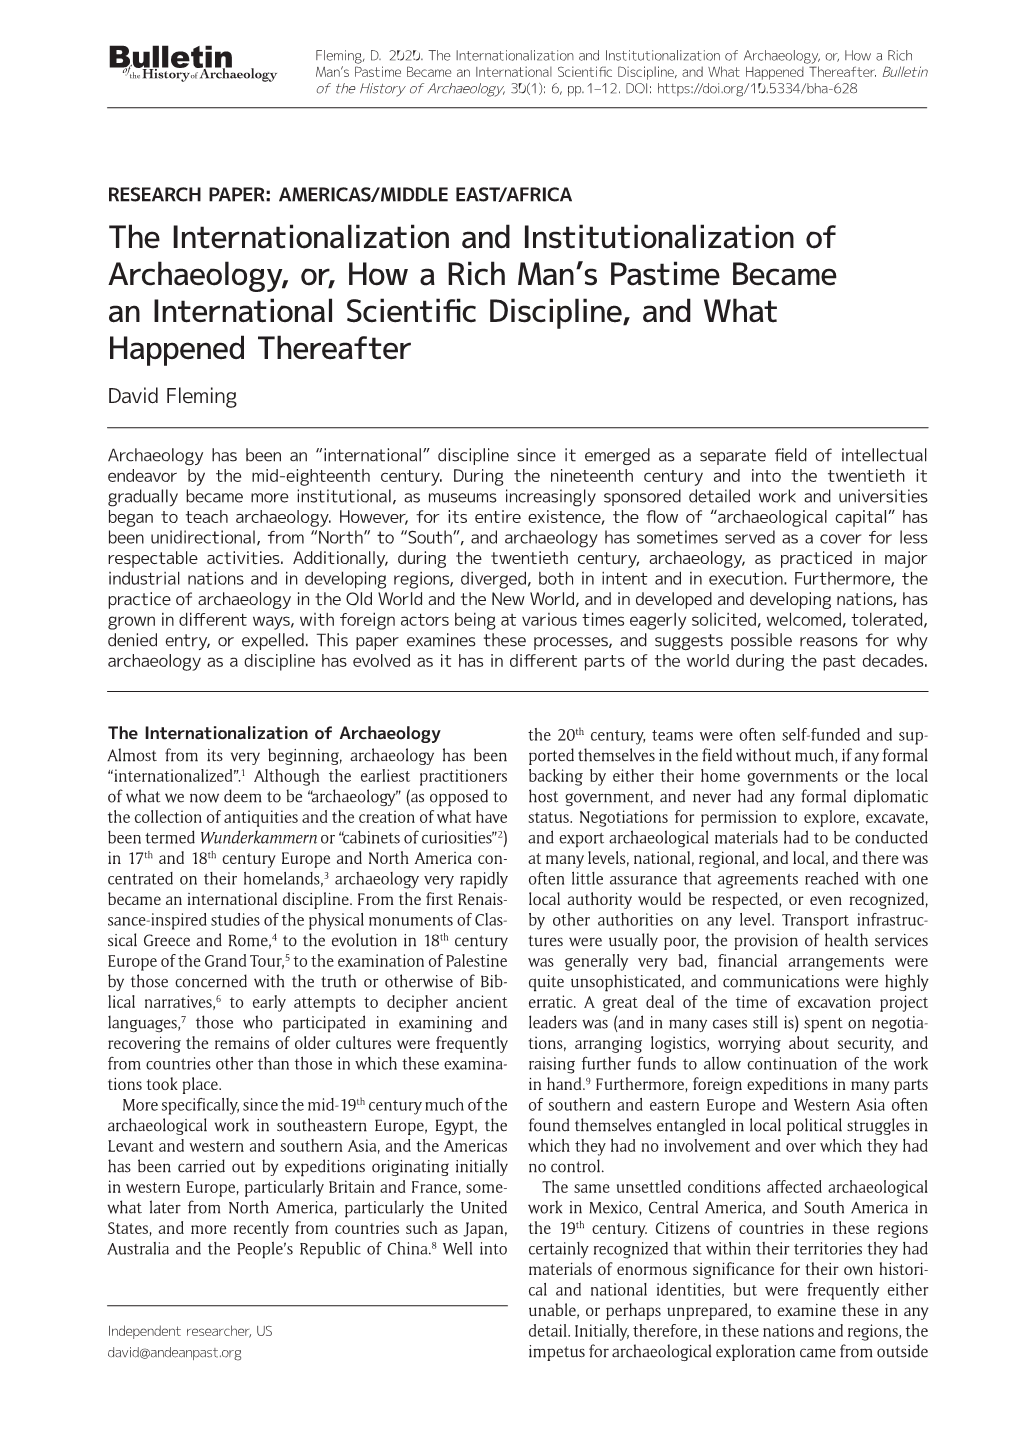 The Internationalization and Institutionalization of Archaeology